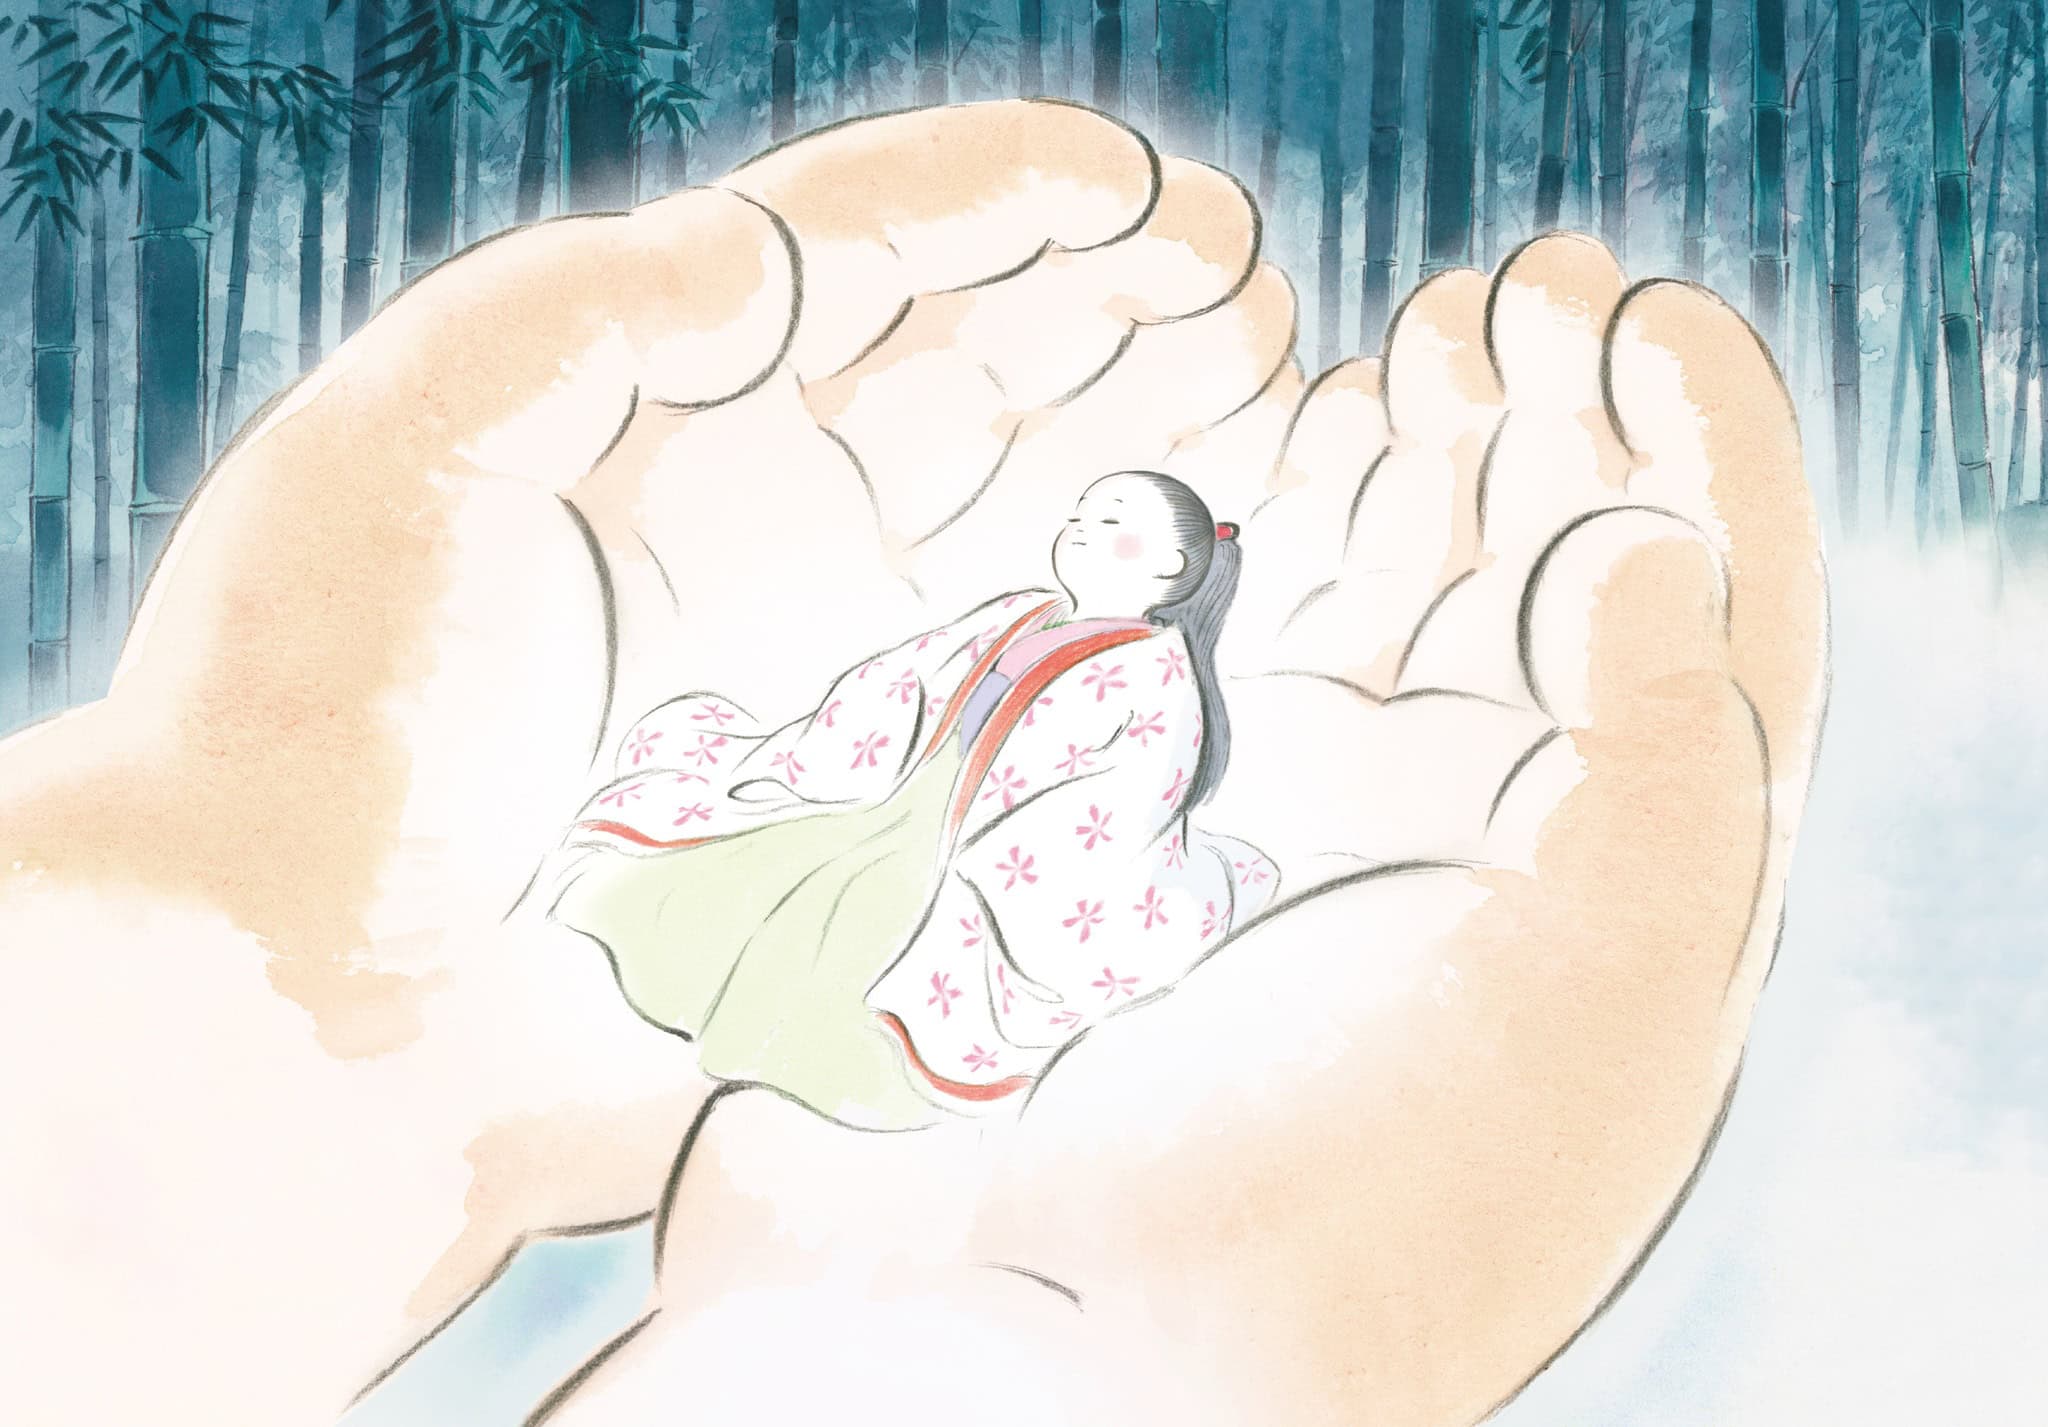 Animated hands holding a tiny girl in this image from Studio Ghibli.